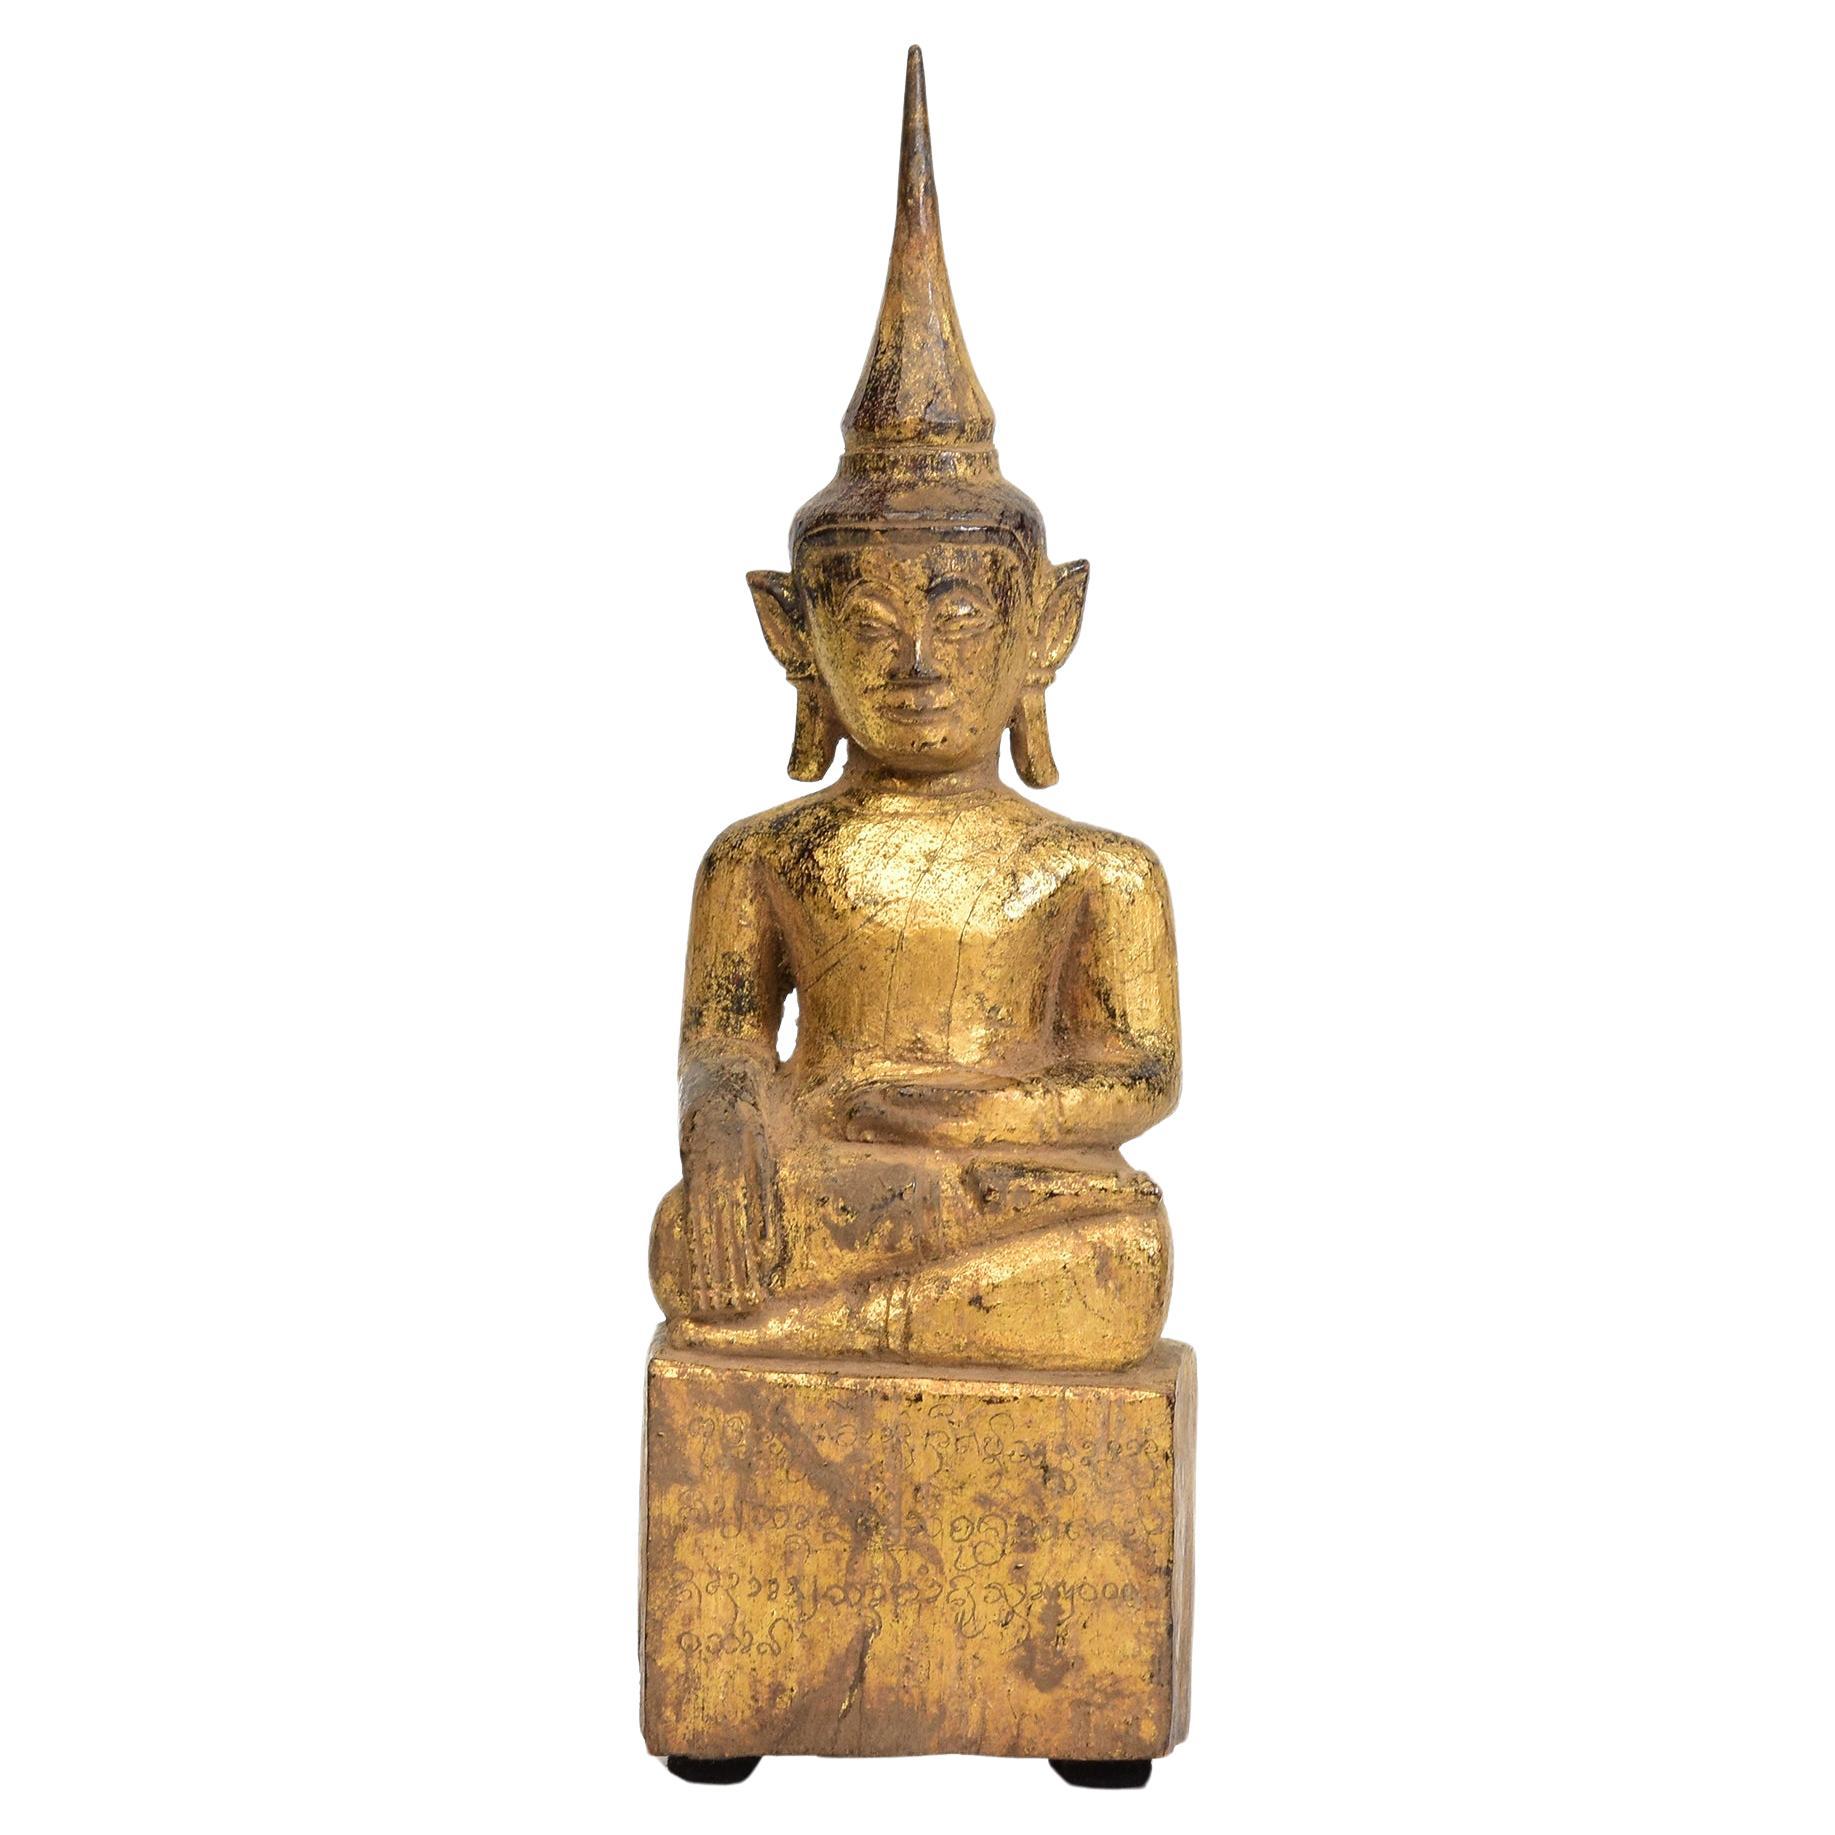 18th Century, Shan, Antique Tai Lue Burmese Wooden Seated Buddha For Sale